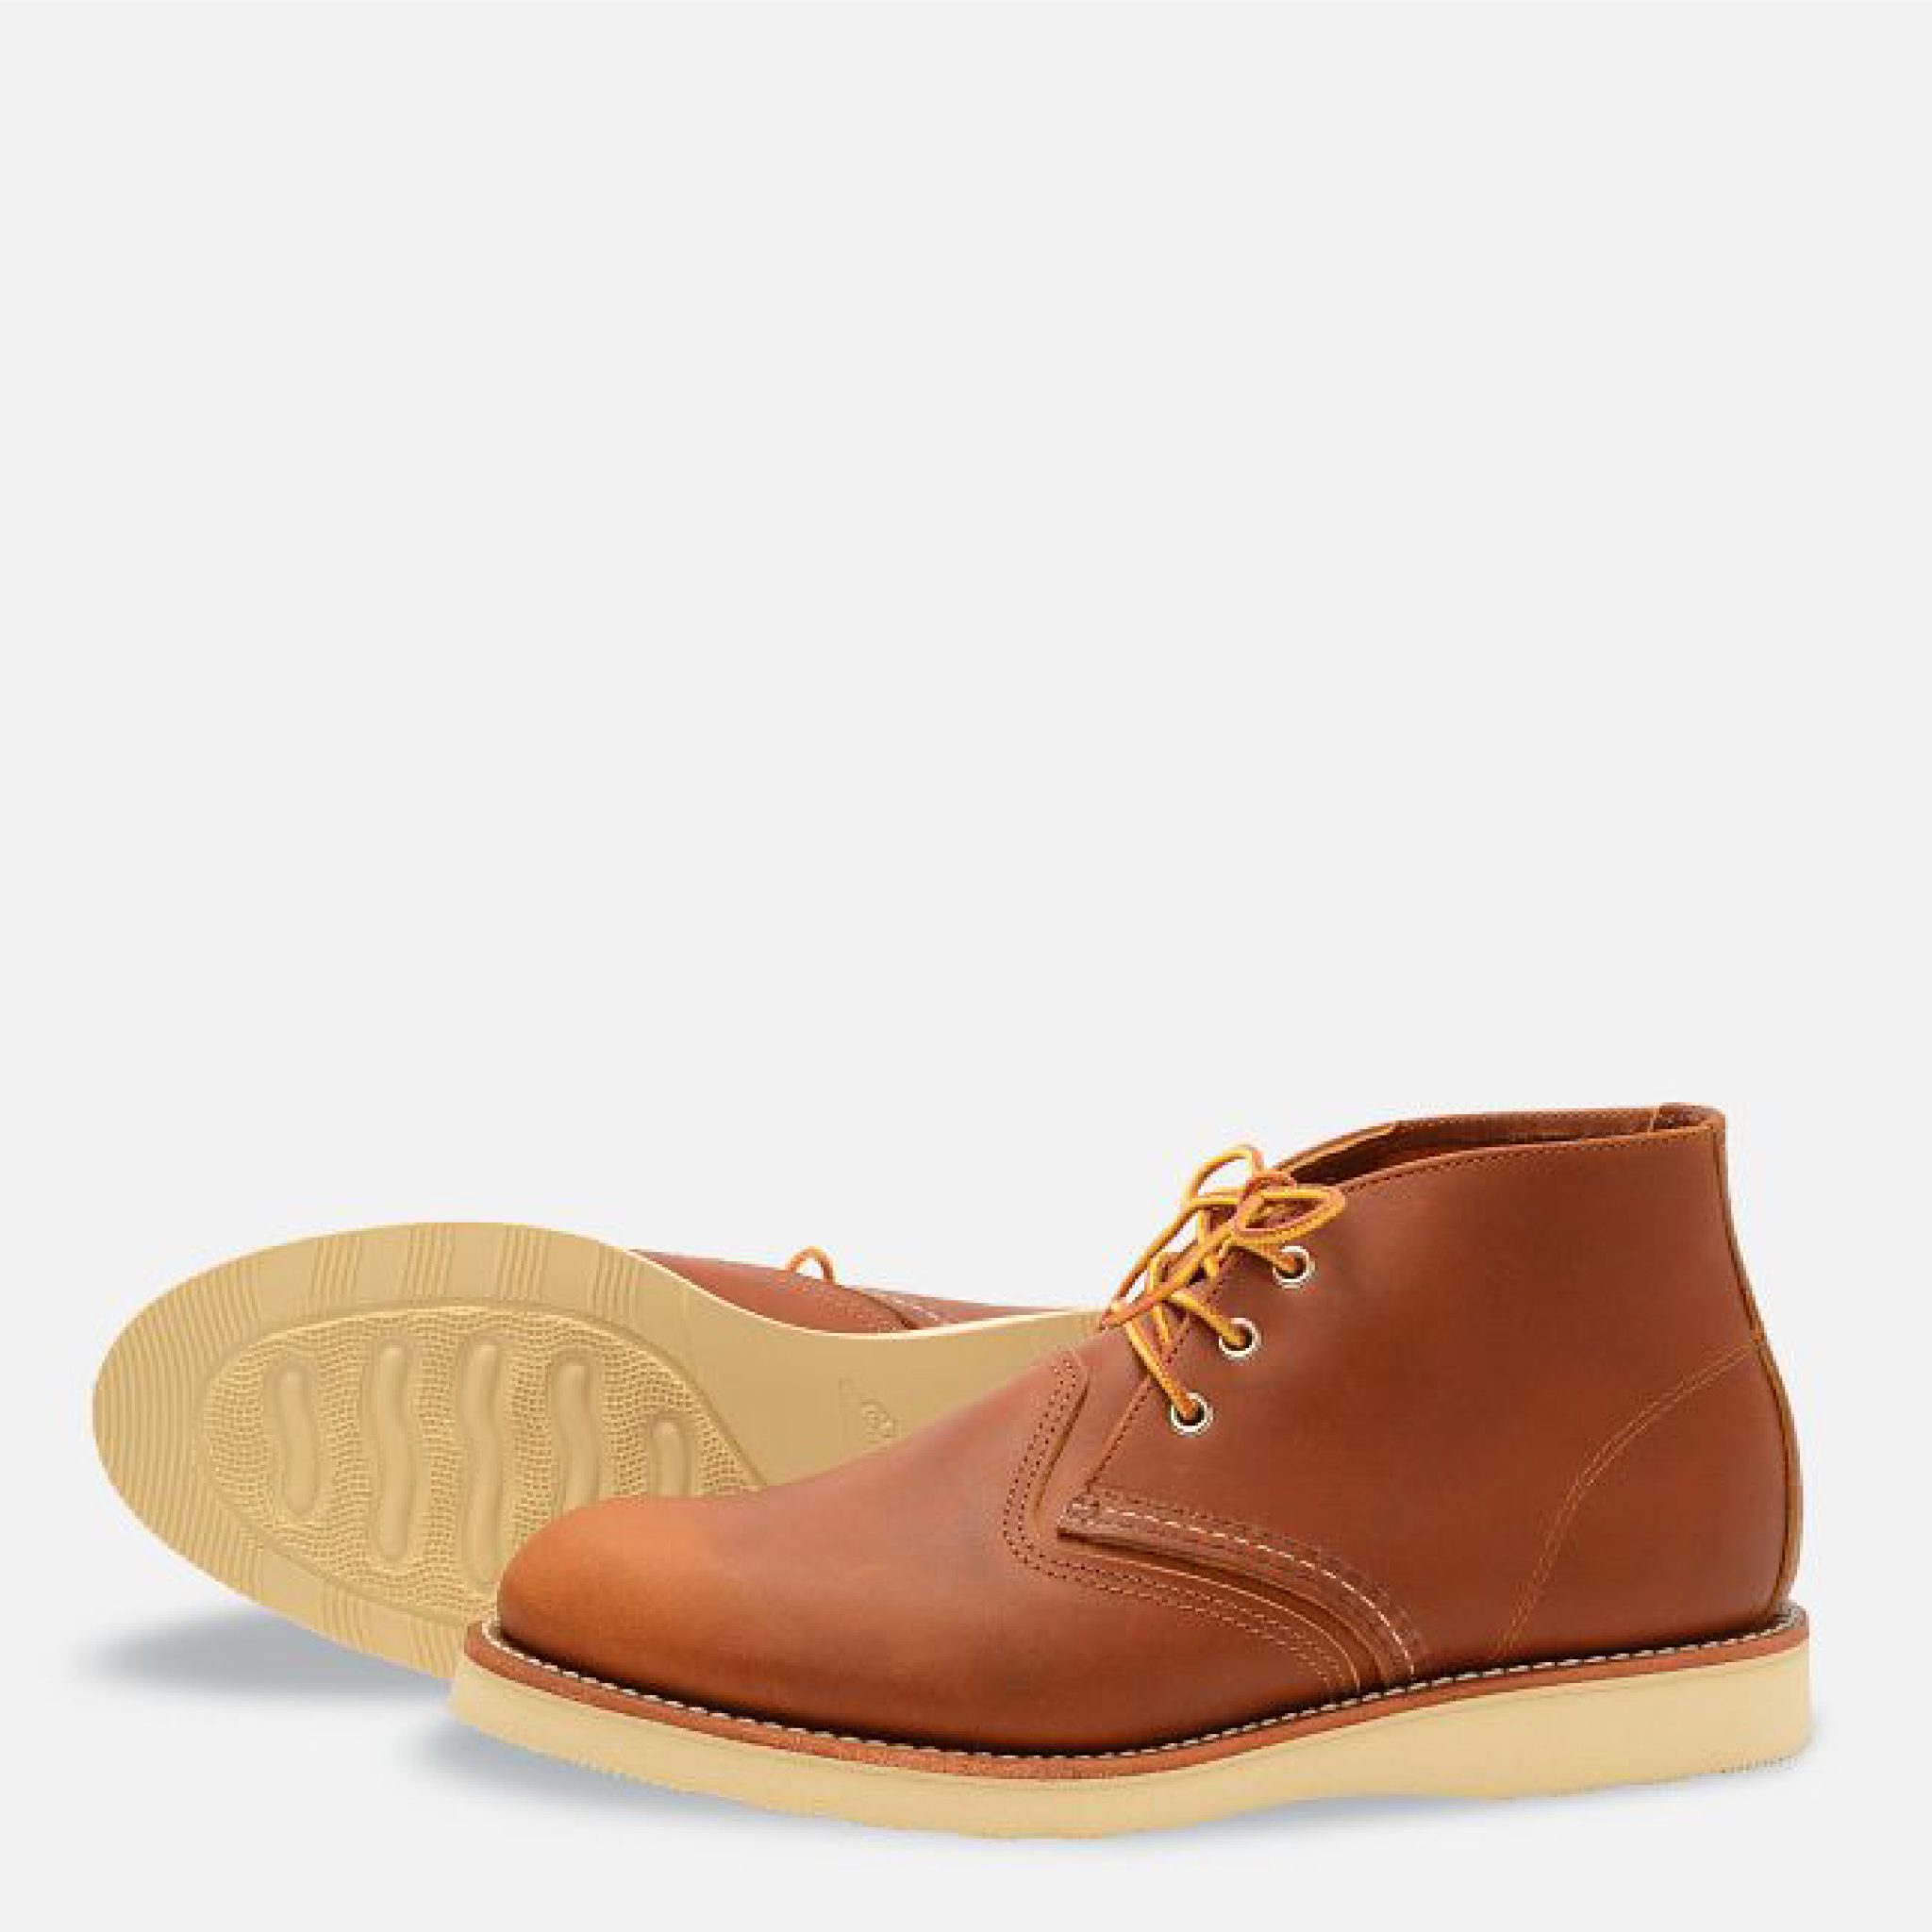 RED WING 8089 IRON RANGER ORO-LEGACY WITH TRACTION TRED - The Leeden Store